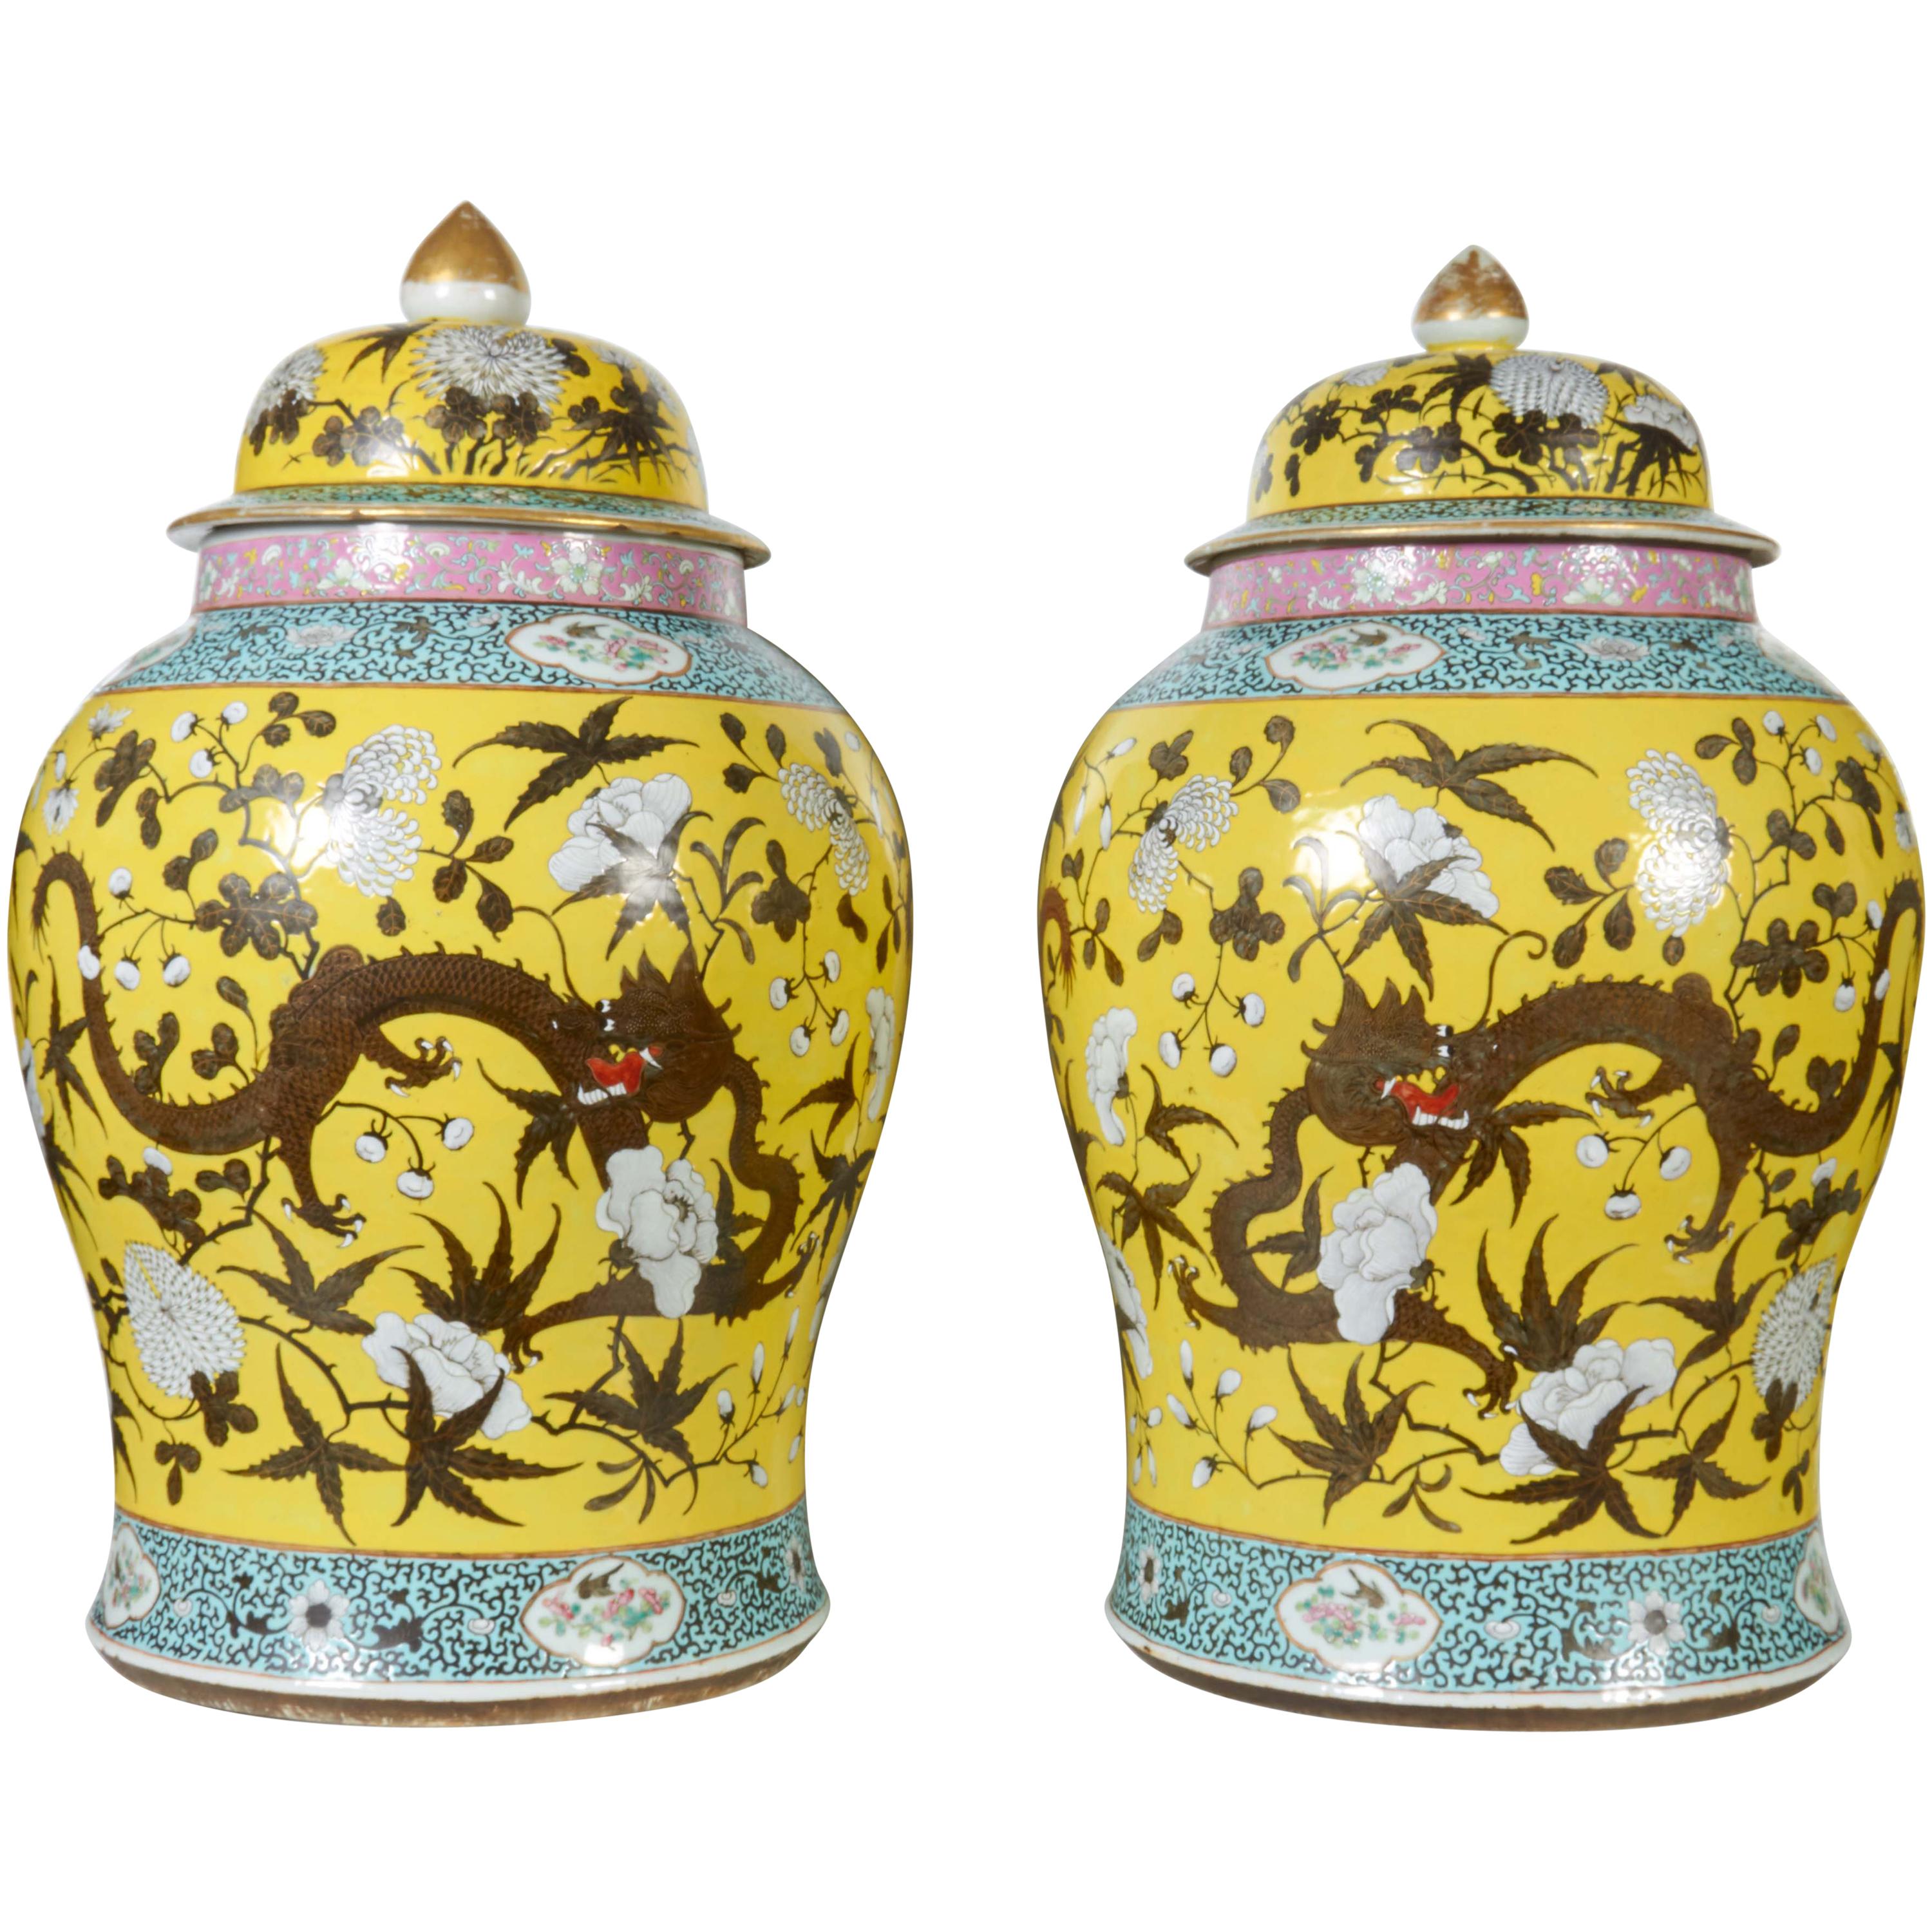 Large Pair of Chinese Famille Jaune Covered Jars with Painted Dragons